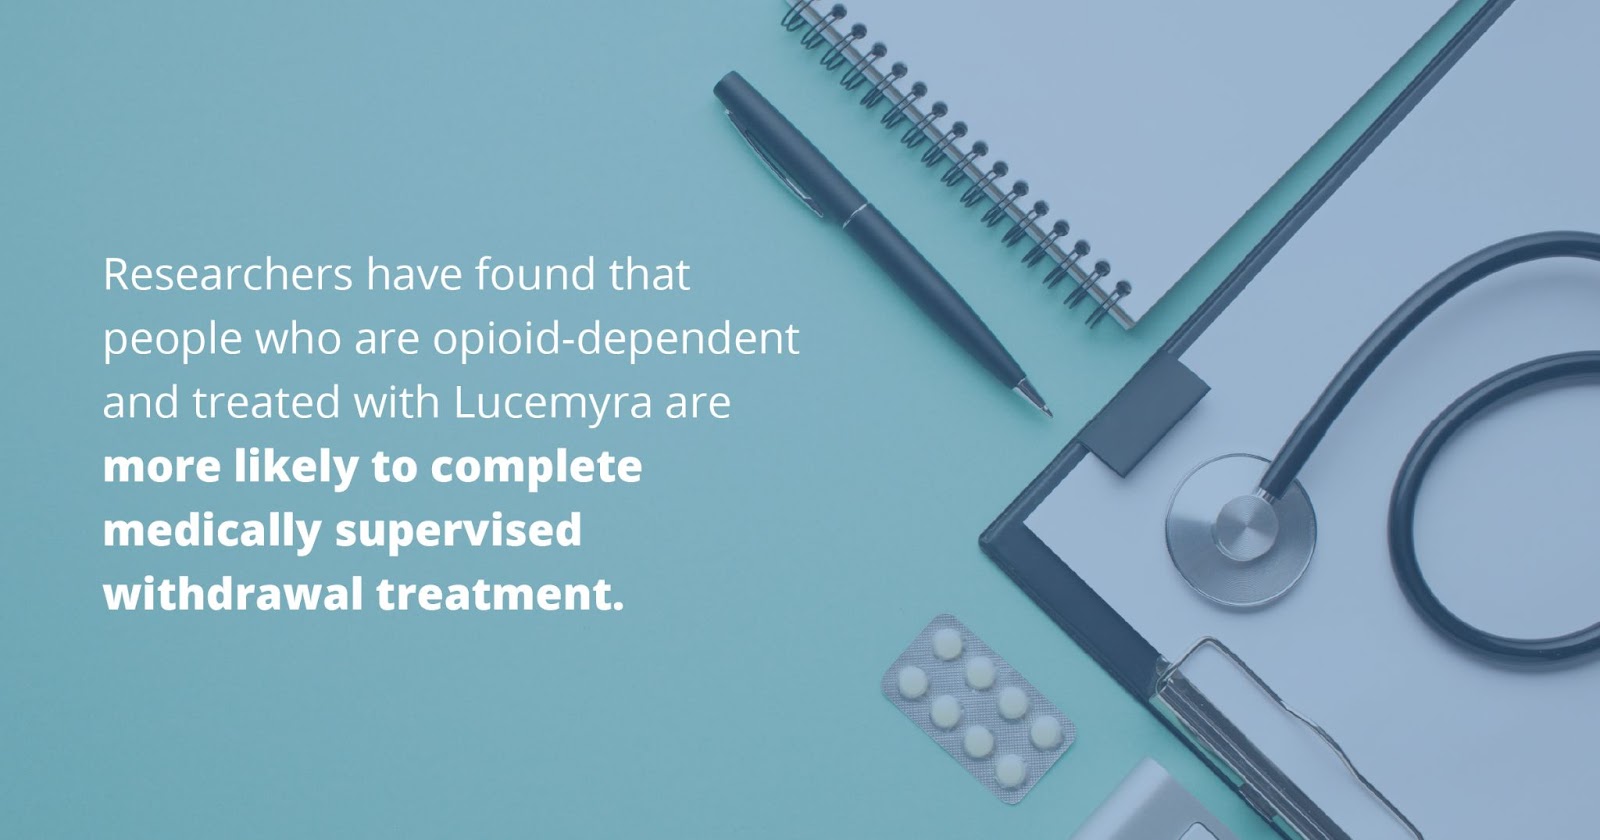 Researchers have found that people who are opioid dependent and treated with lucemyra are more likely to complete medically supervised withdrawal treatment.